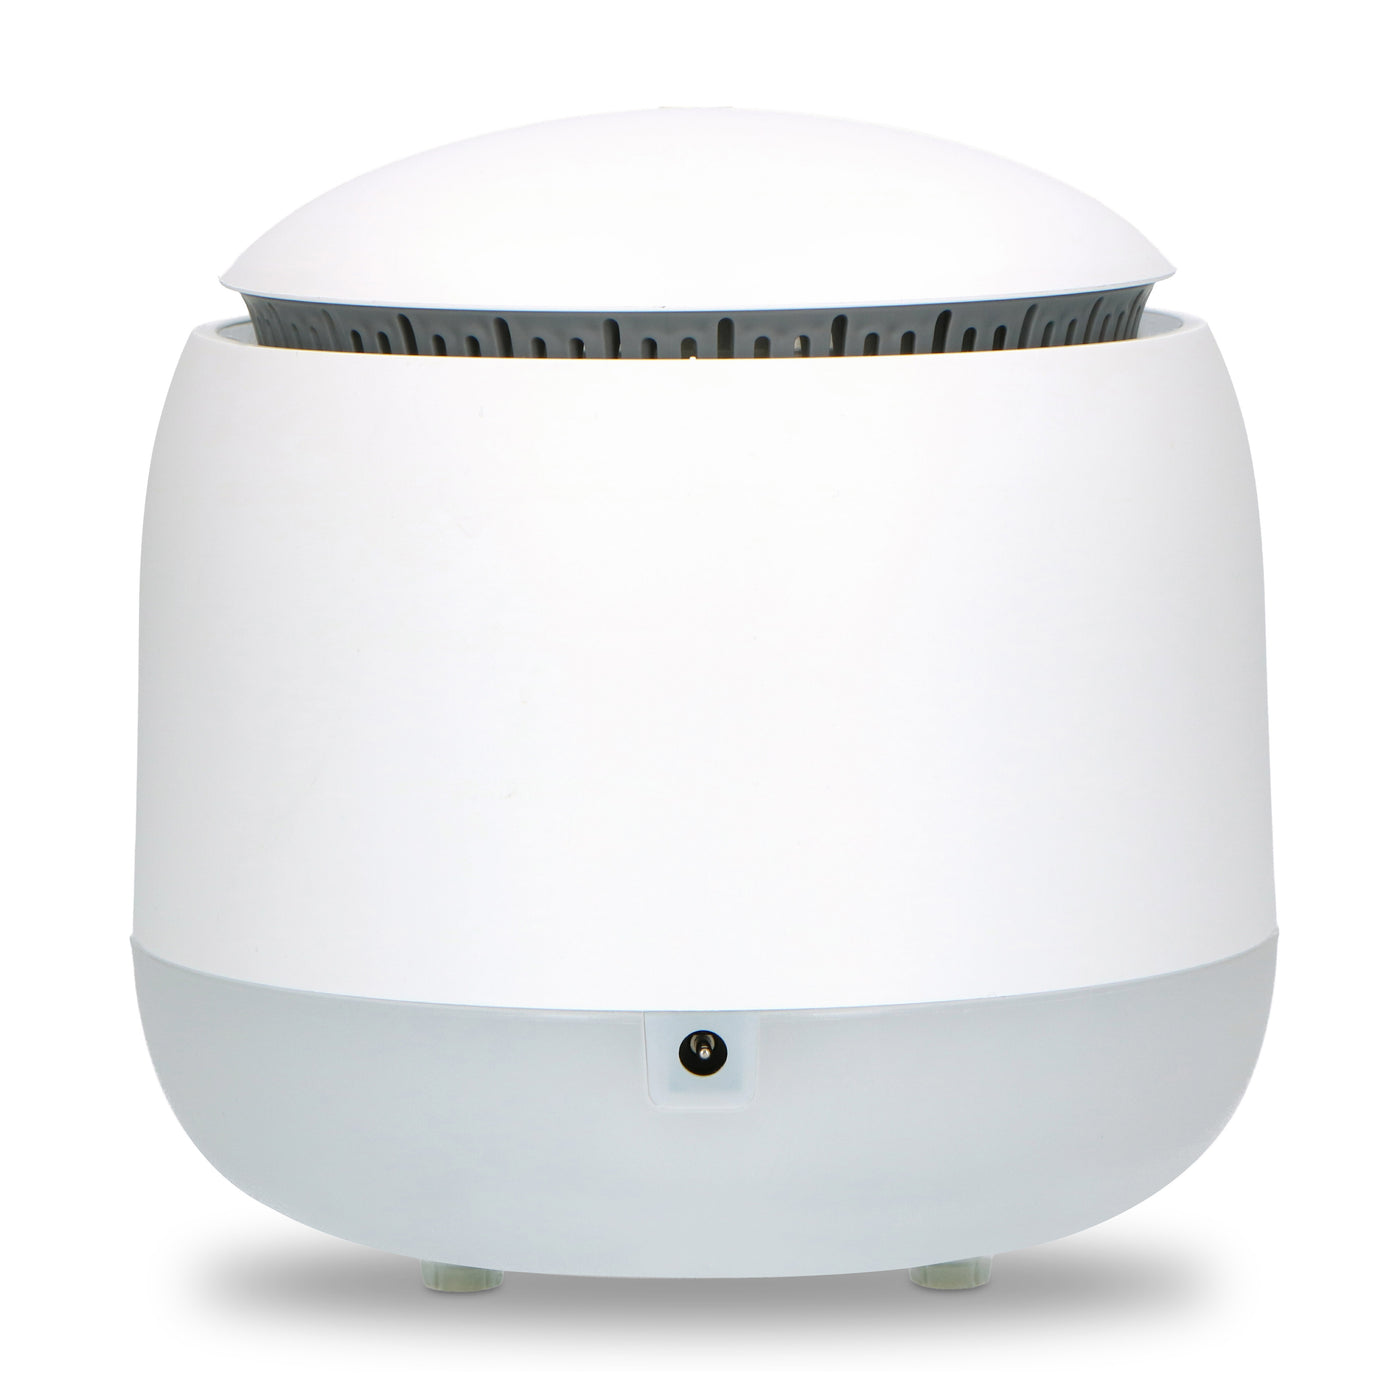 Alecto BC23 - Humidifier baby room 3 in 1, white